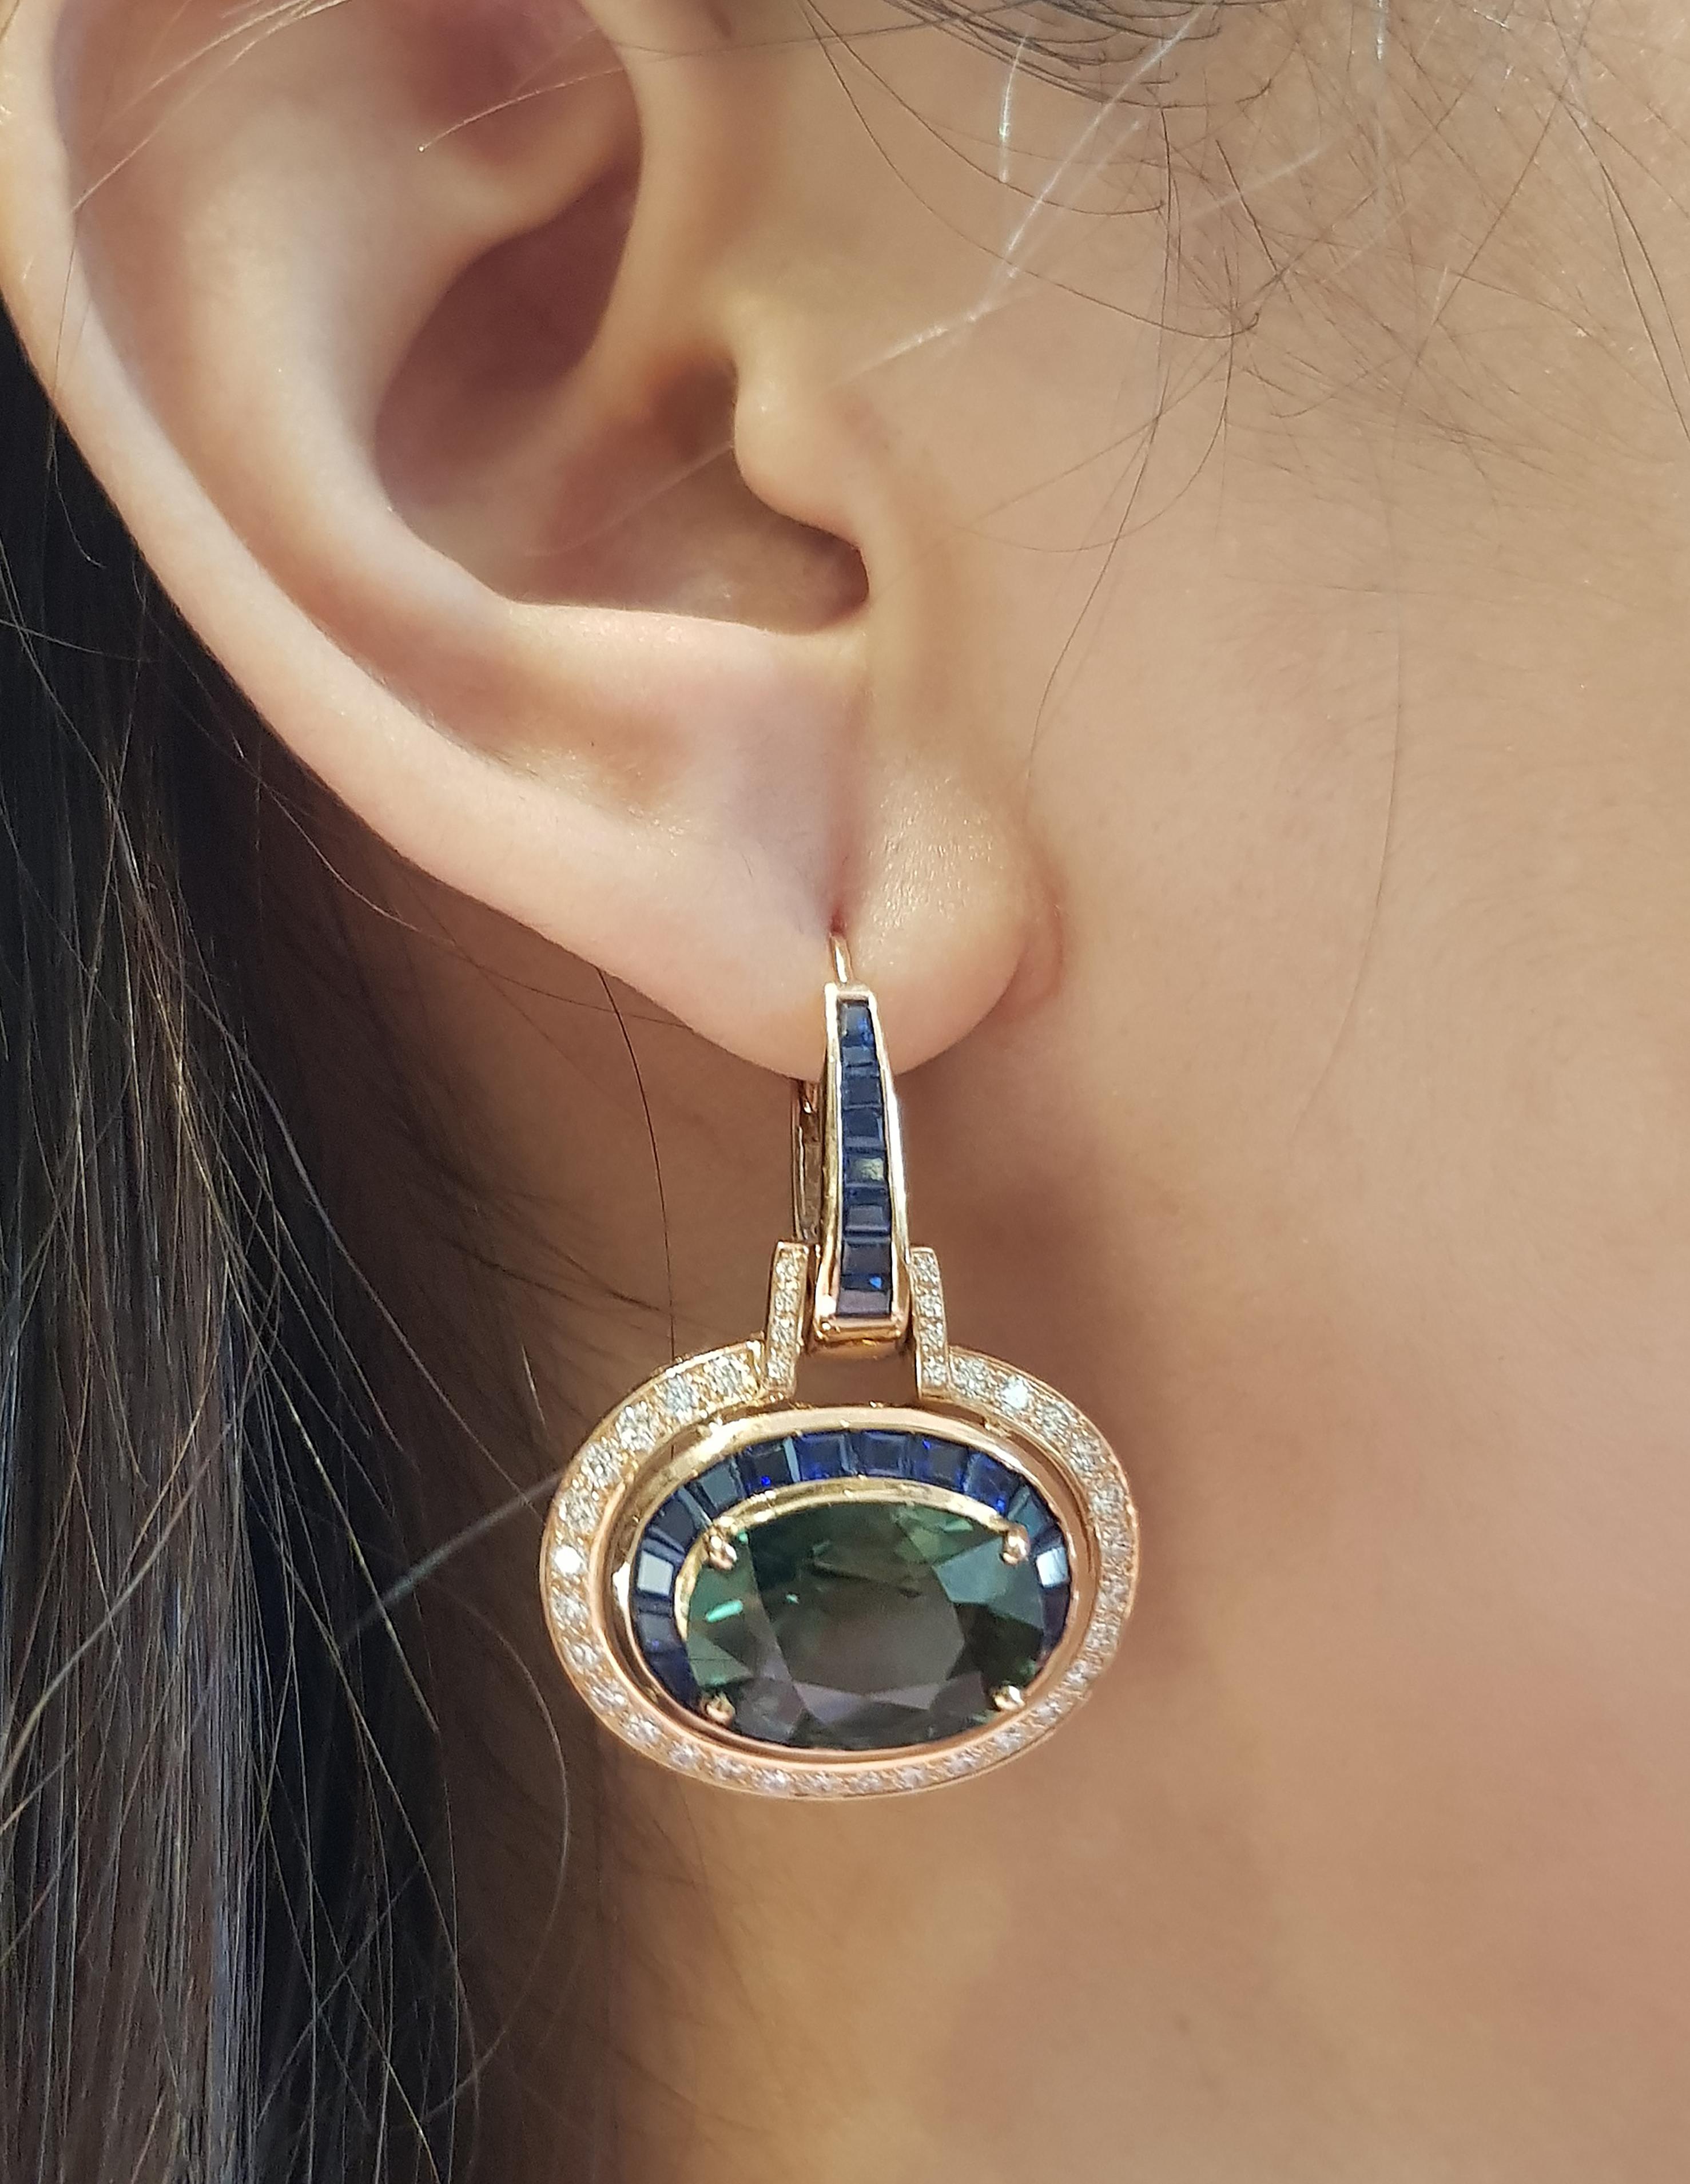 Green Sapphire 18.20 carats with Blue Sapphire 5.23 carats and Diamond 1.23 carats Earrings set in 18 Karat Rose Gold Settings

Width:  2.5 cm 
Length: 3.4 cm
Total Weight: 16.65 grams

